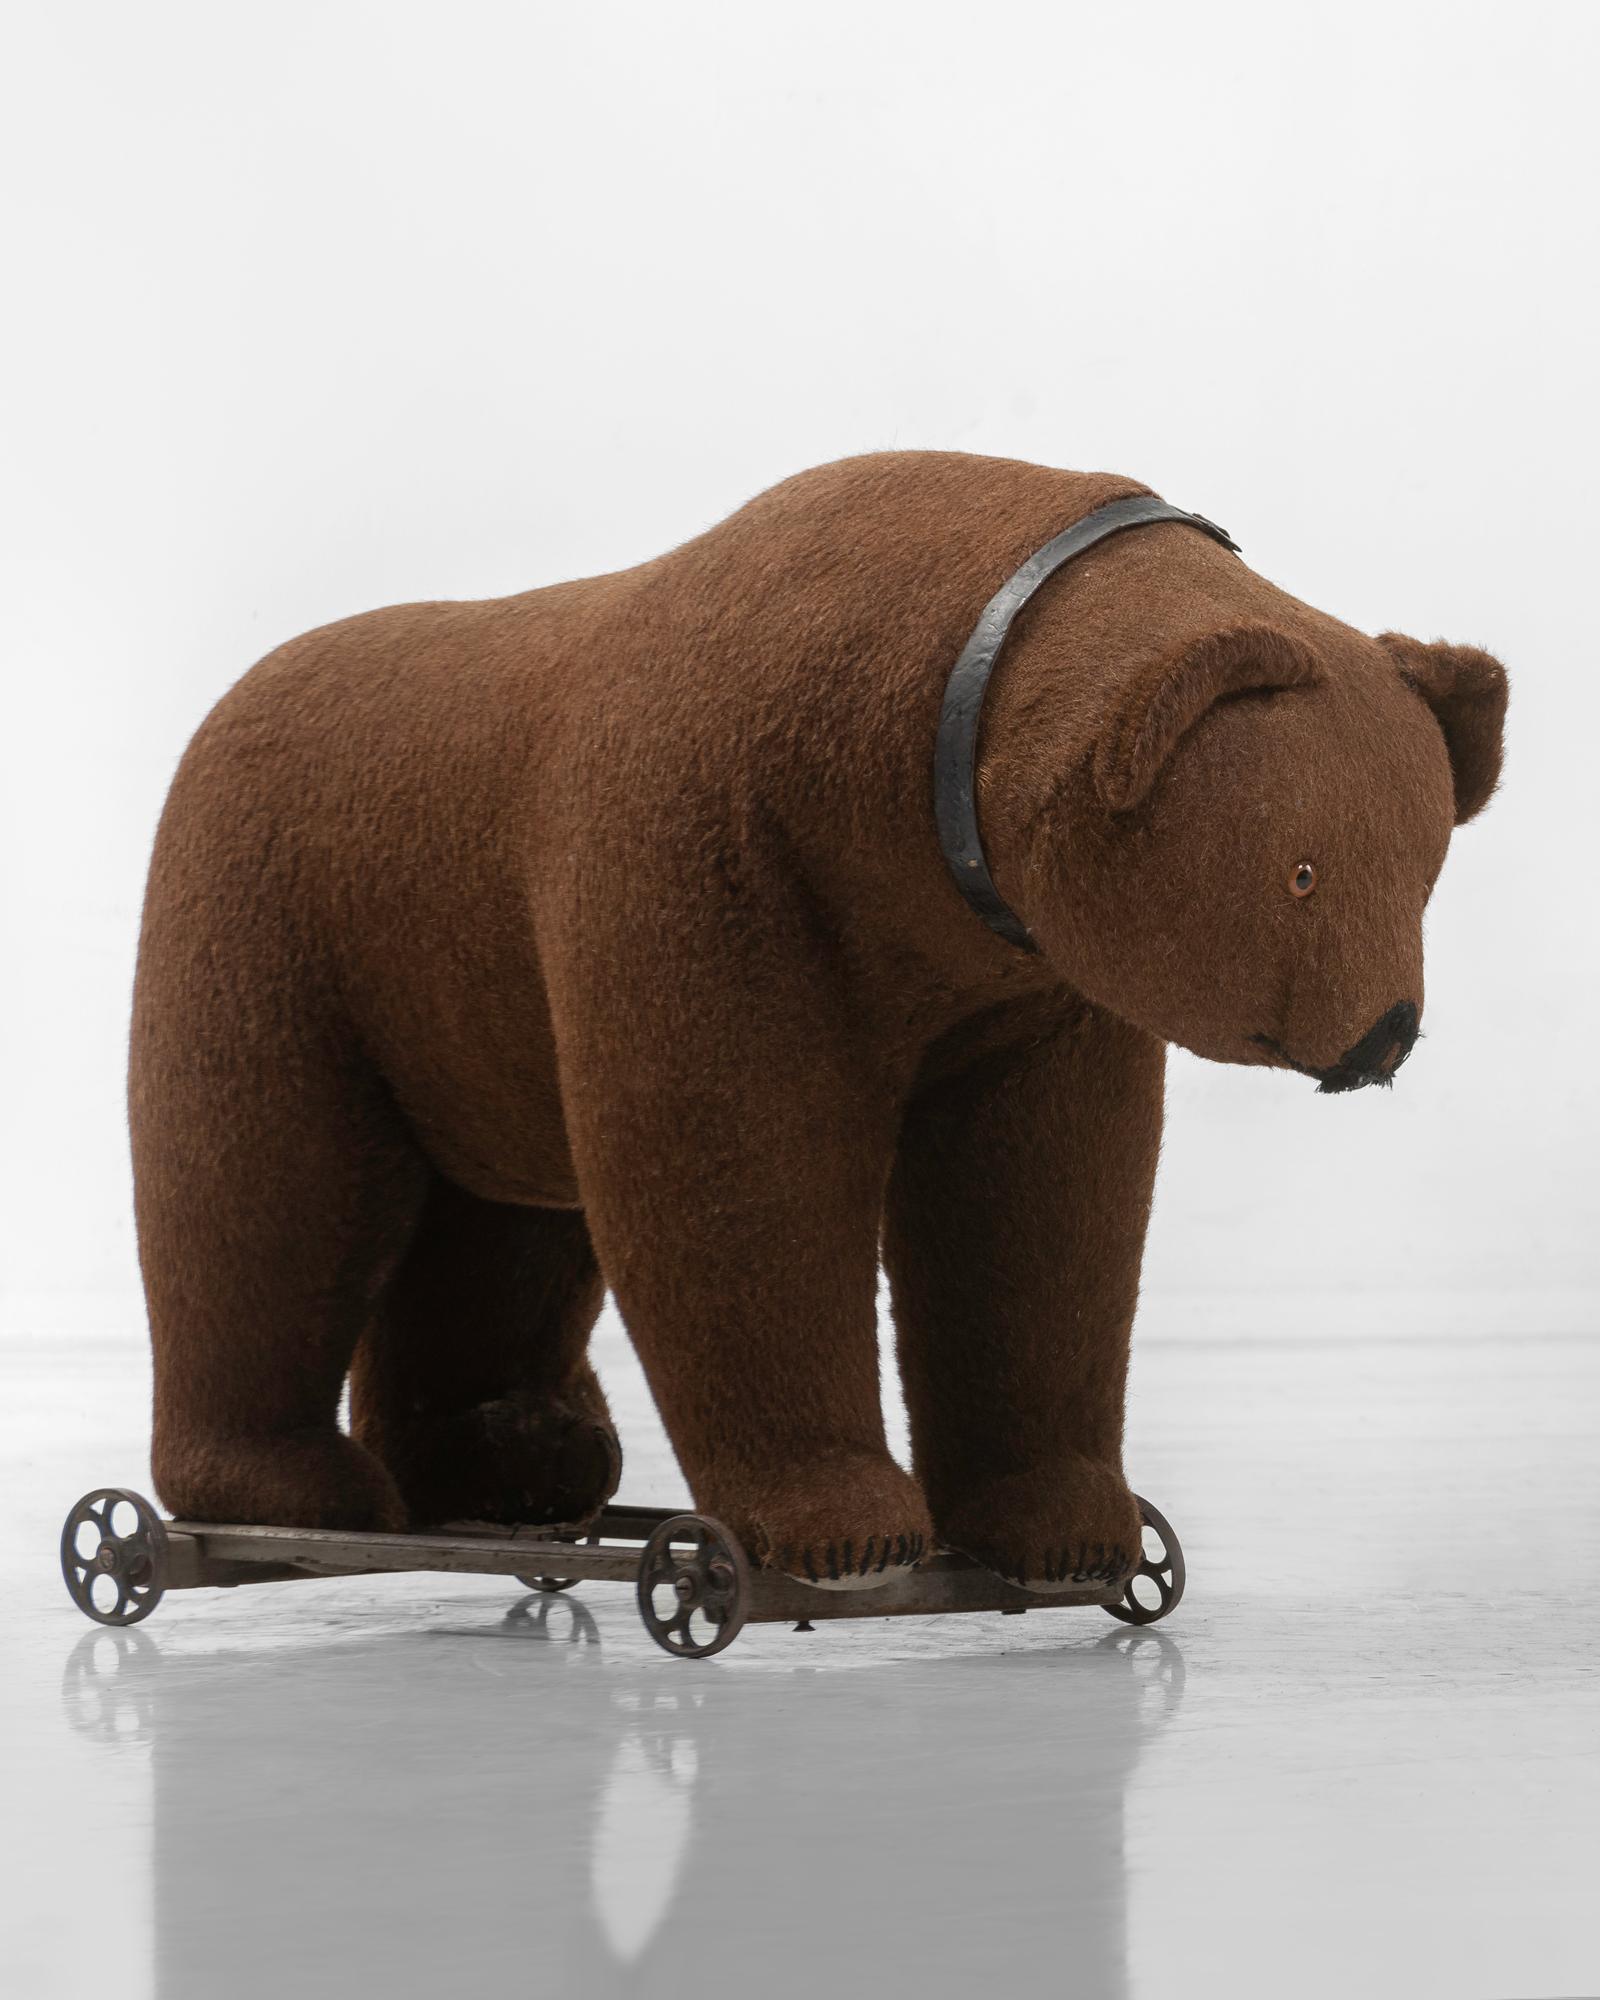 Large Victorian toy bear pull ride, circa 1900

Plush toy bear on wheels to be pulled or pushed.